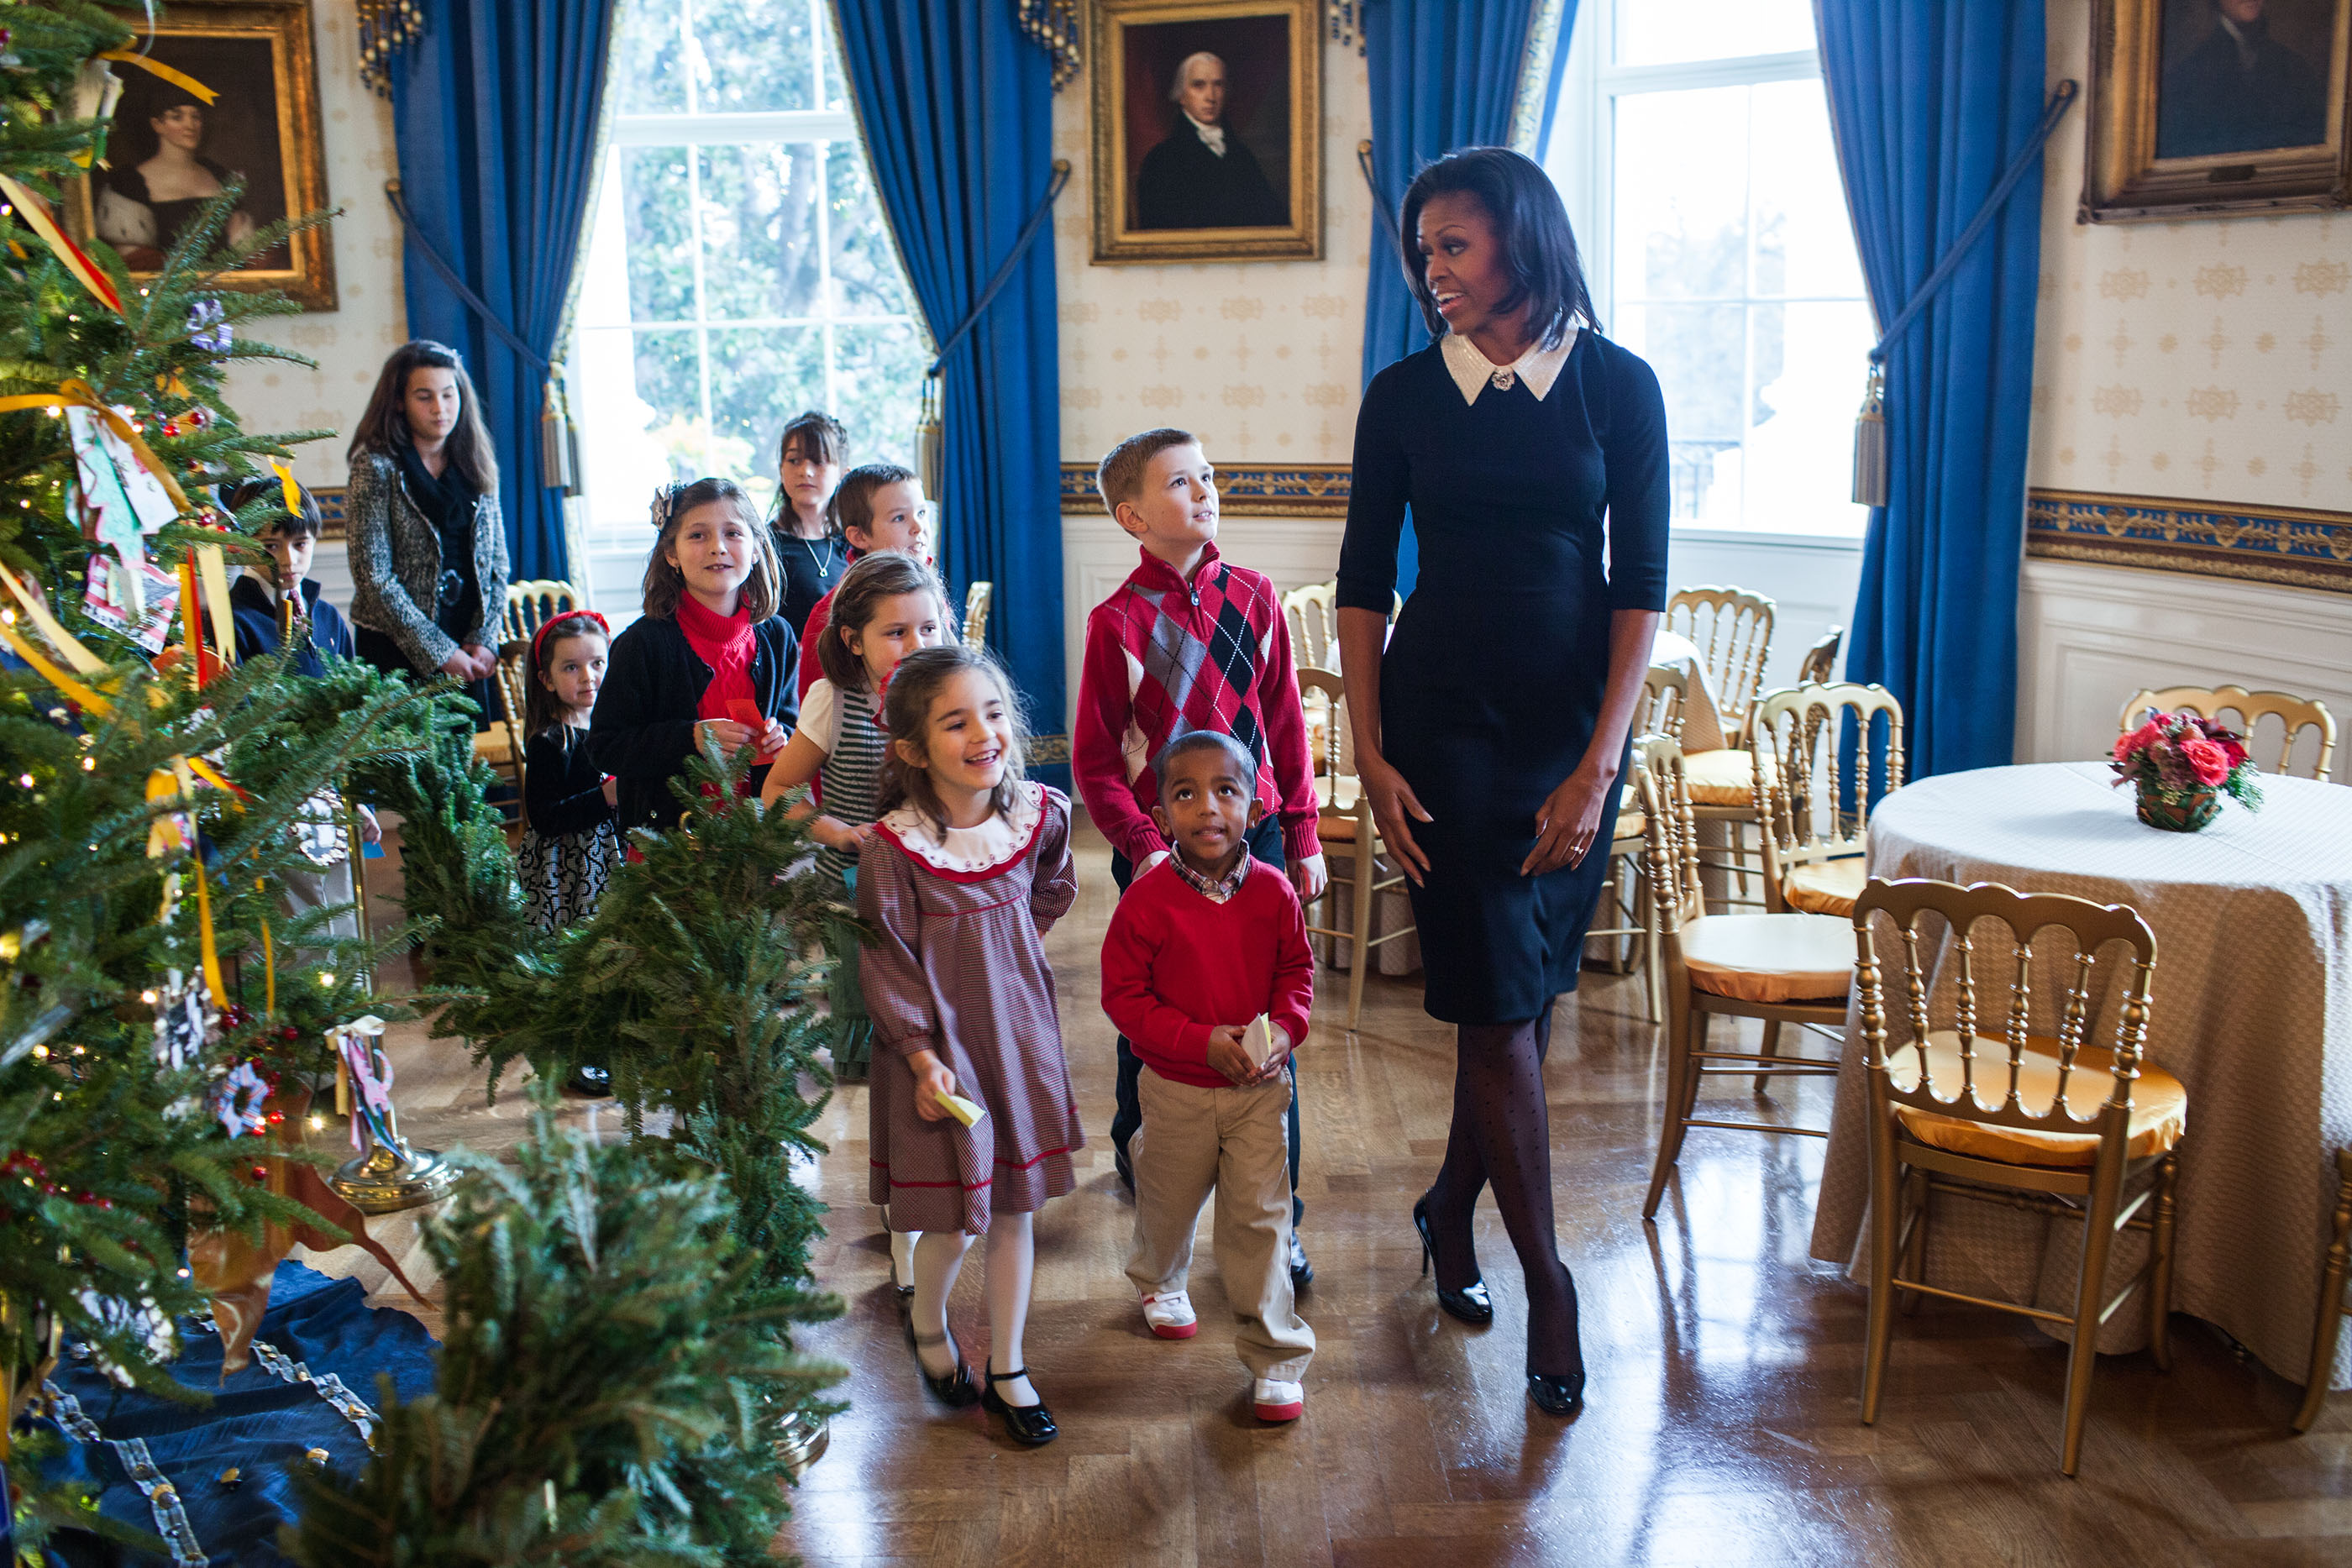 The First Lady walks with children past the official White House Christmas Tree in the White House, Nov. 30, 2011. (Official White House Photo by Lawrence Jackson)